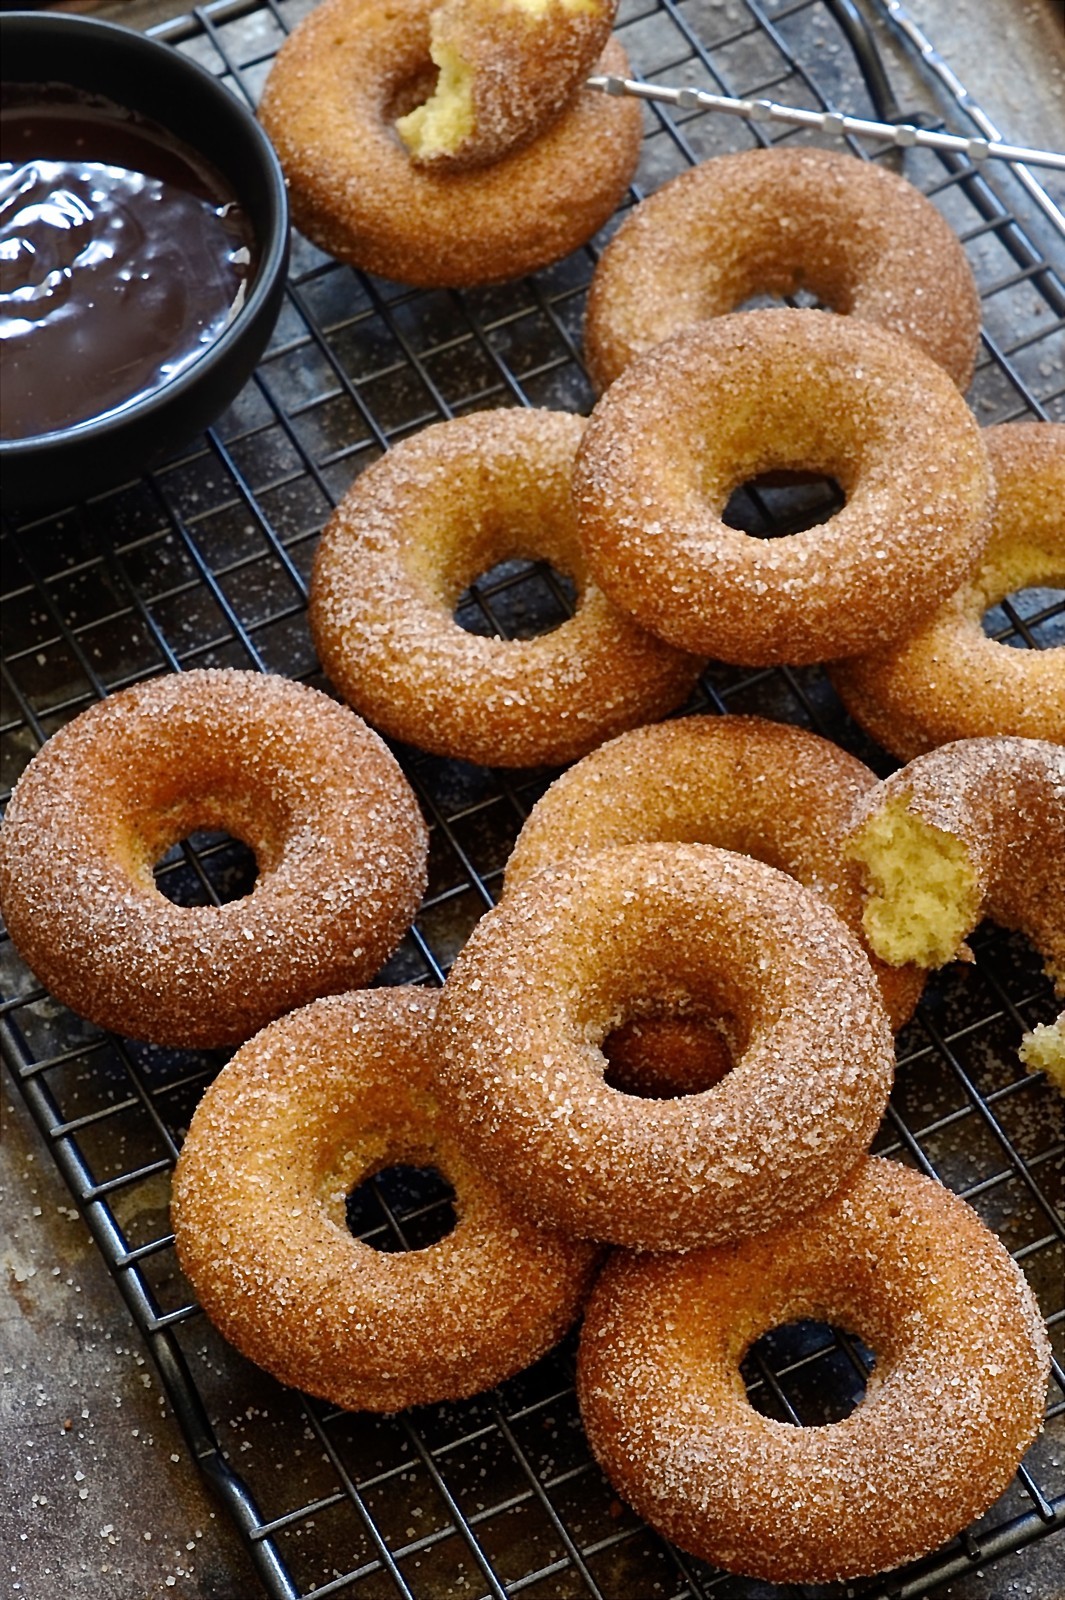 Baked donuts with cinnamon